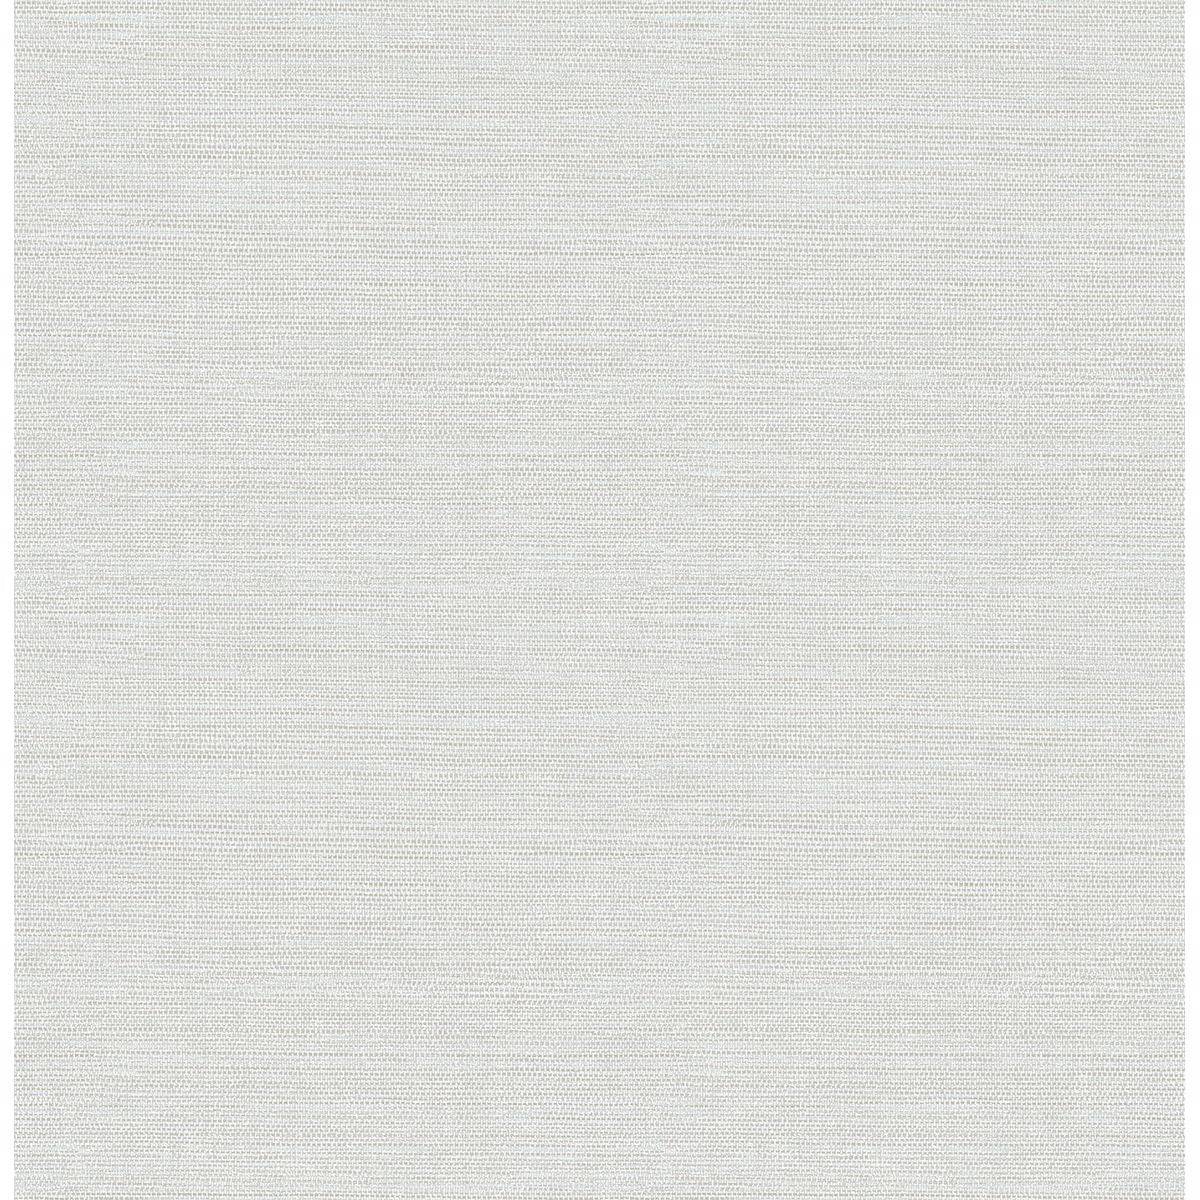 Picture of Agave Light Grey Faux Grasscloth Wallpaper